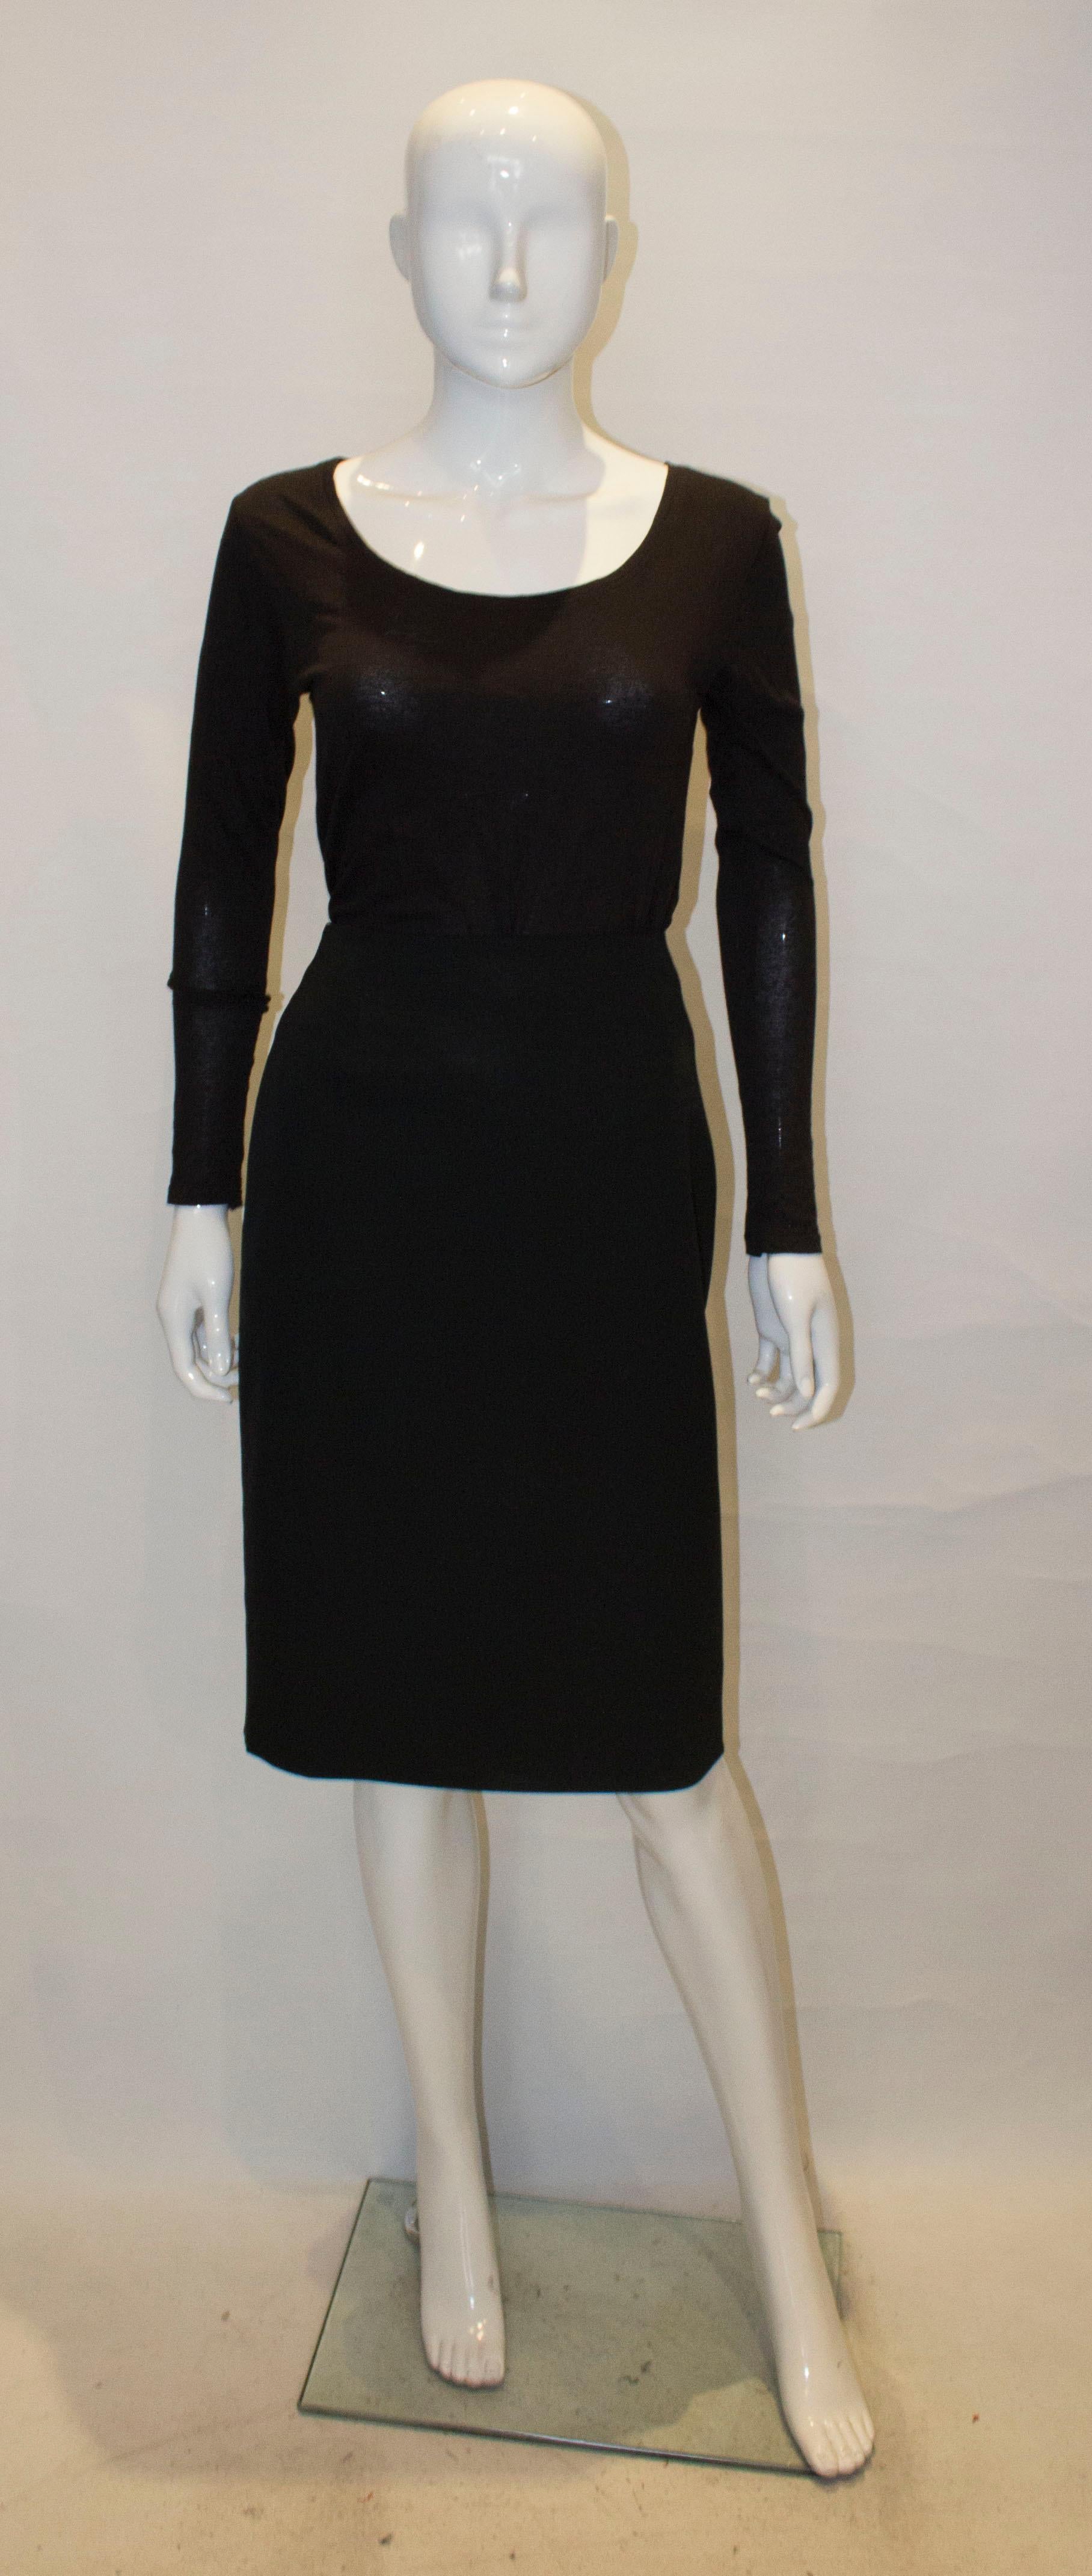 A chic black wool skirt by Christian Dior , UK size 10.
The skirt is lined in silk , with an invisible zip opening and slit at the back.